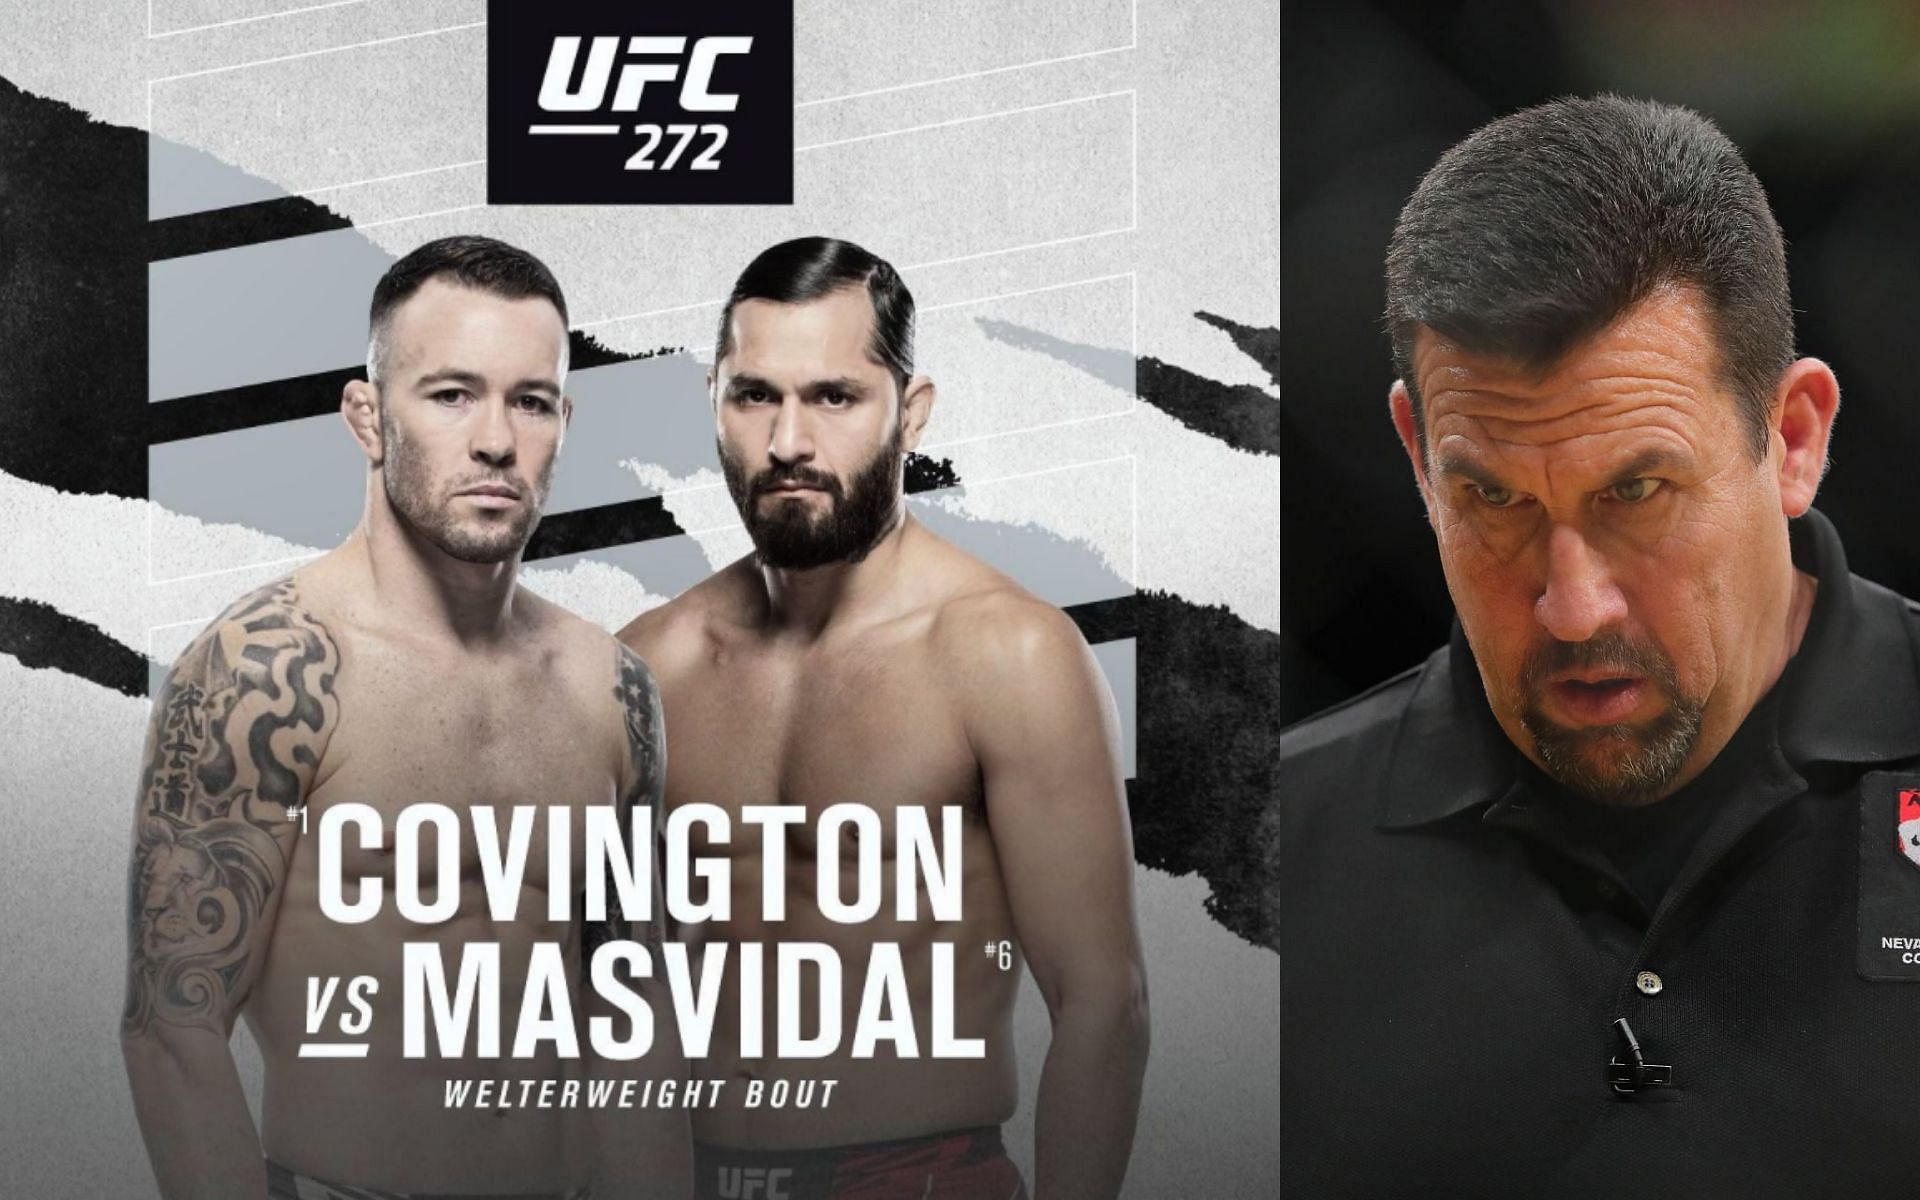 Colby Covington and Jorge Masvidal (left) (Credit: @colbycovmma on Instagram), John McCarthy (right)